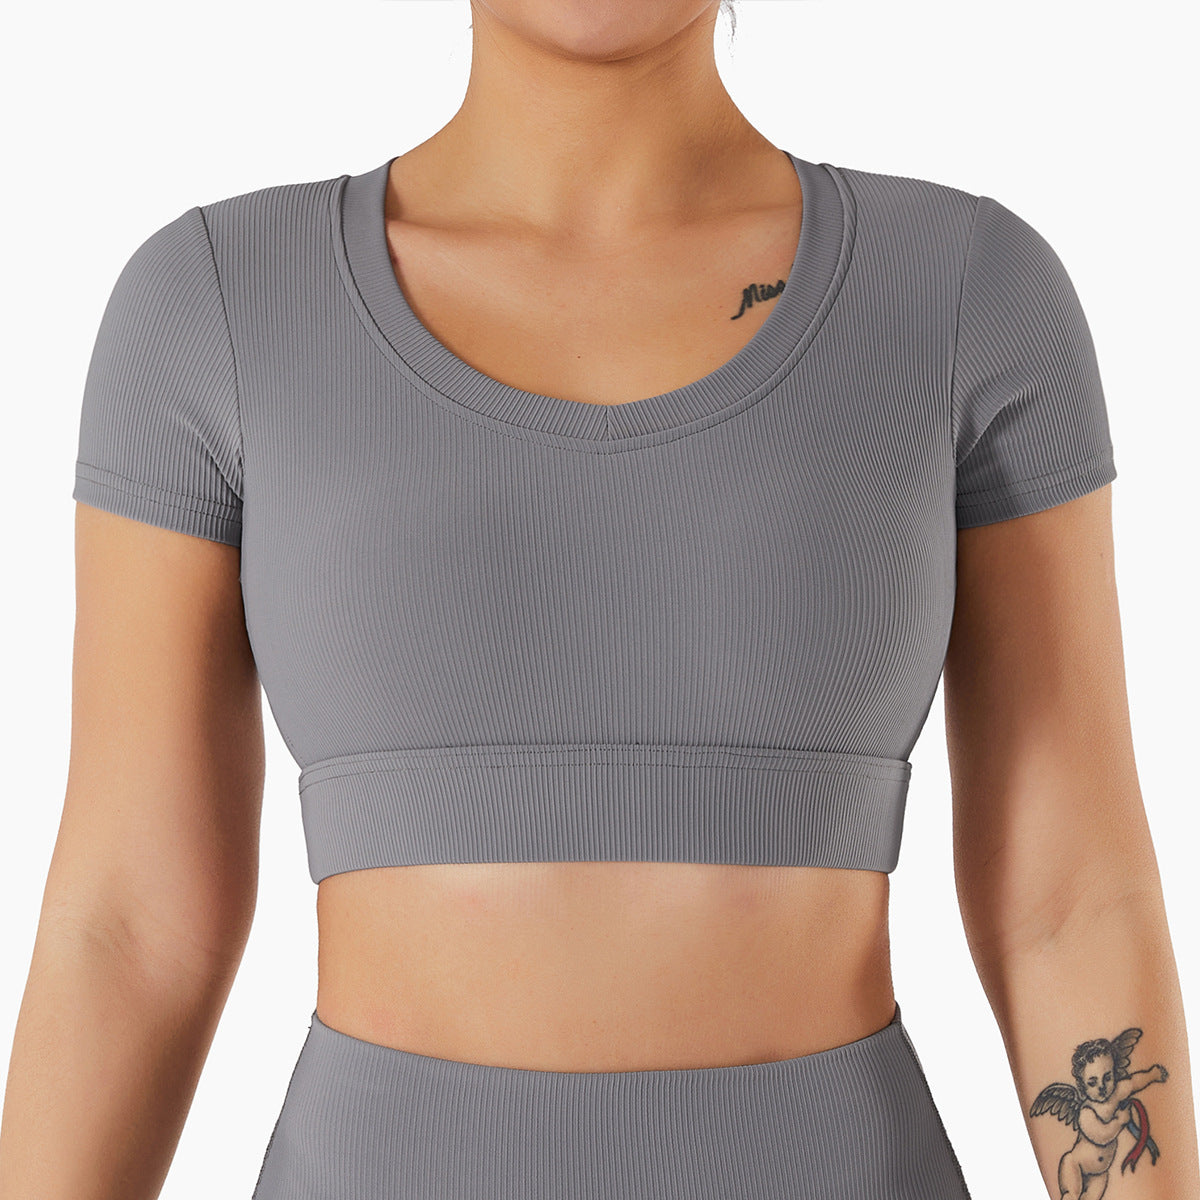 Clean Look Outfit | Round Neck Crop top